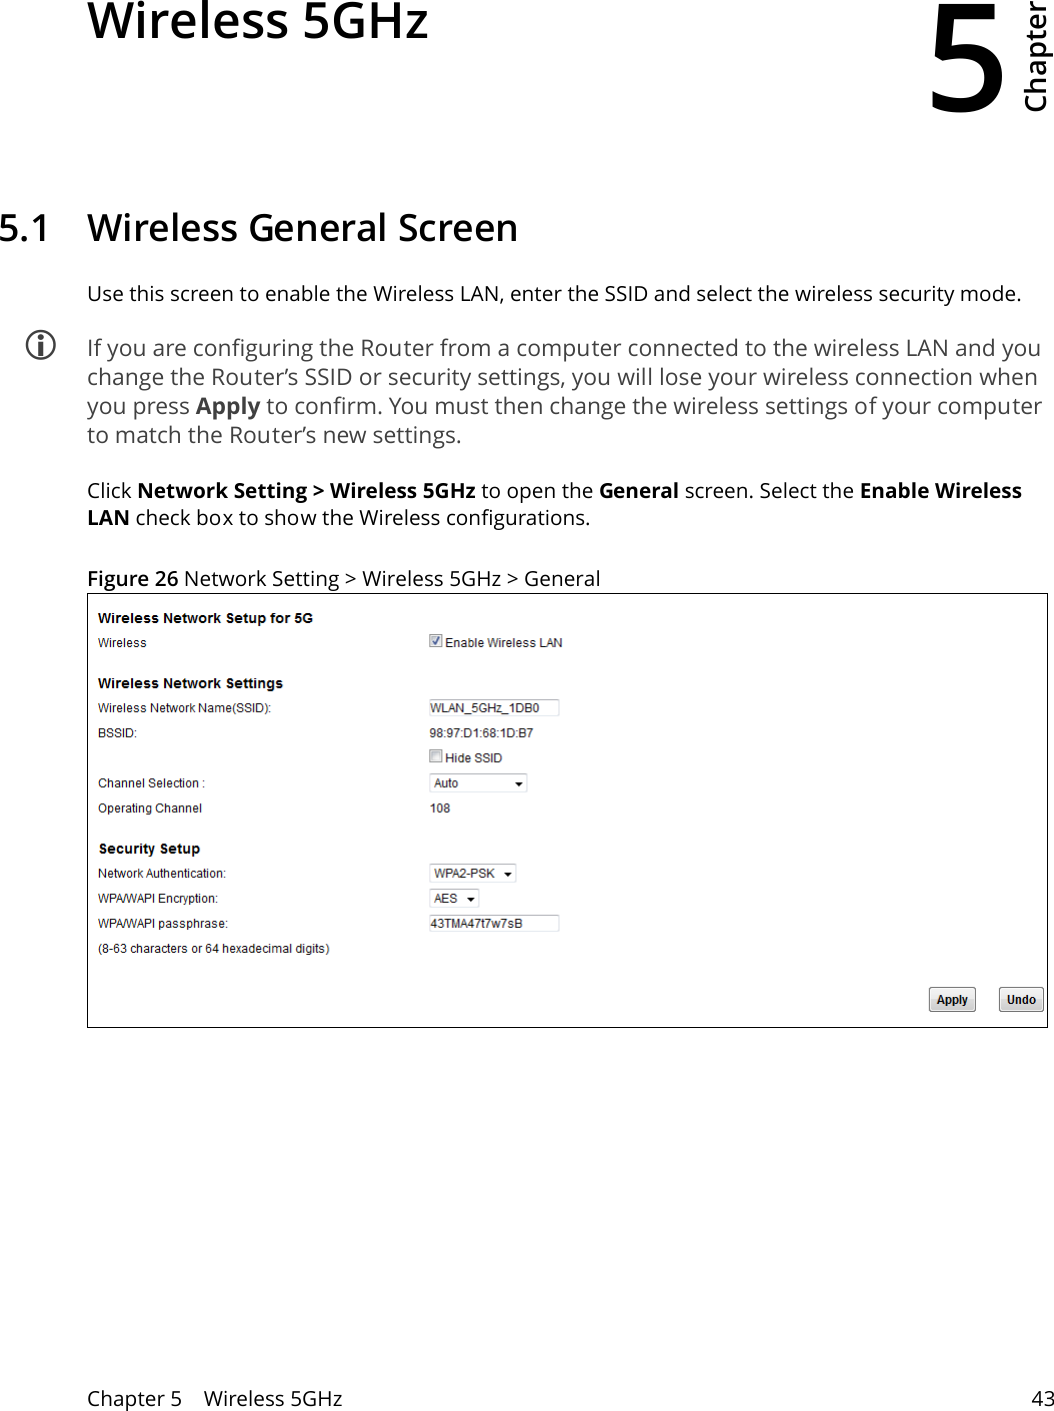 5Chapter Chapter 5    Wireless 5GHz 43CHAPTER 5 Chapter 5 Wireless 5GHz5.1   Wireless General Screen Use this screen to enable the Wireless LAN, enter the SSID and select the wireless security mode. If you are configuring the Router from a computer connected to the wireless LAN and you change the Router’s SSID or security settings, you will lose your wireless connection when you press Apply to confirm. You must then change the wireless settings of your computer to match the Router’s new settings.Click Network Setting &gt; Wireless 5GHz to open the General screen. Select the Enable Wireless LAN check box to show the Wireless configurations.Figure 26 Network Setting &gt; Wireless 5GHz &gt; General 